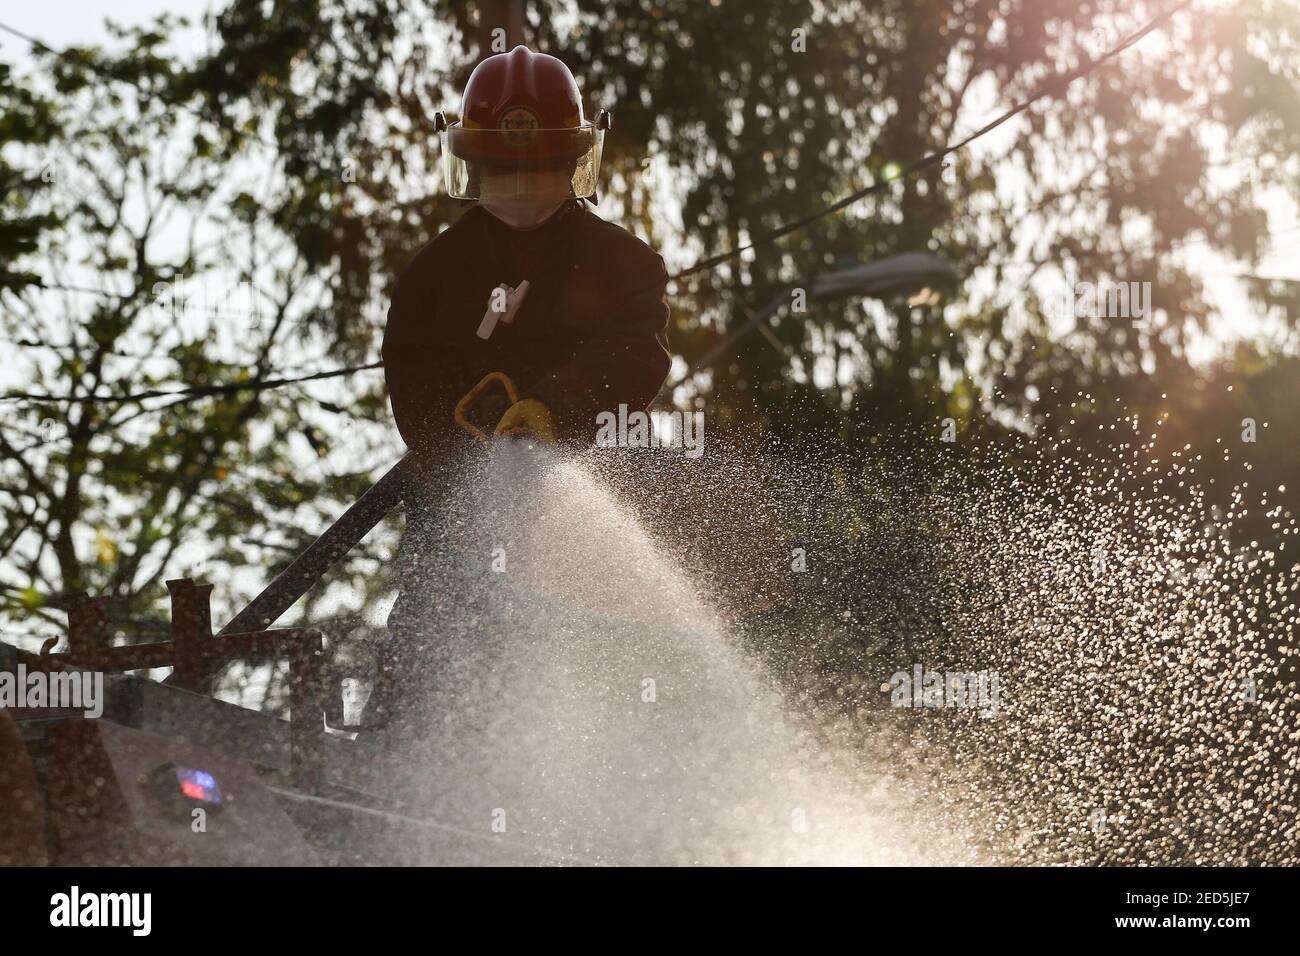 Fireman uses a hoses to spray disinfectant solution along a street to help curb the spread of COVID-19 during the coronavirus lockdown in Manila, Philippines. Stock Photo